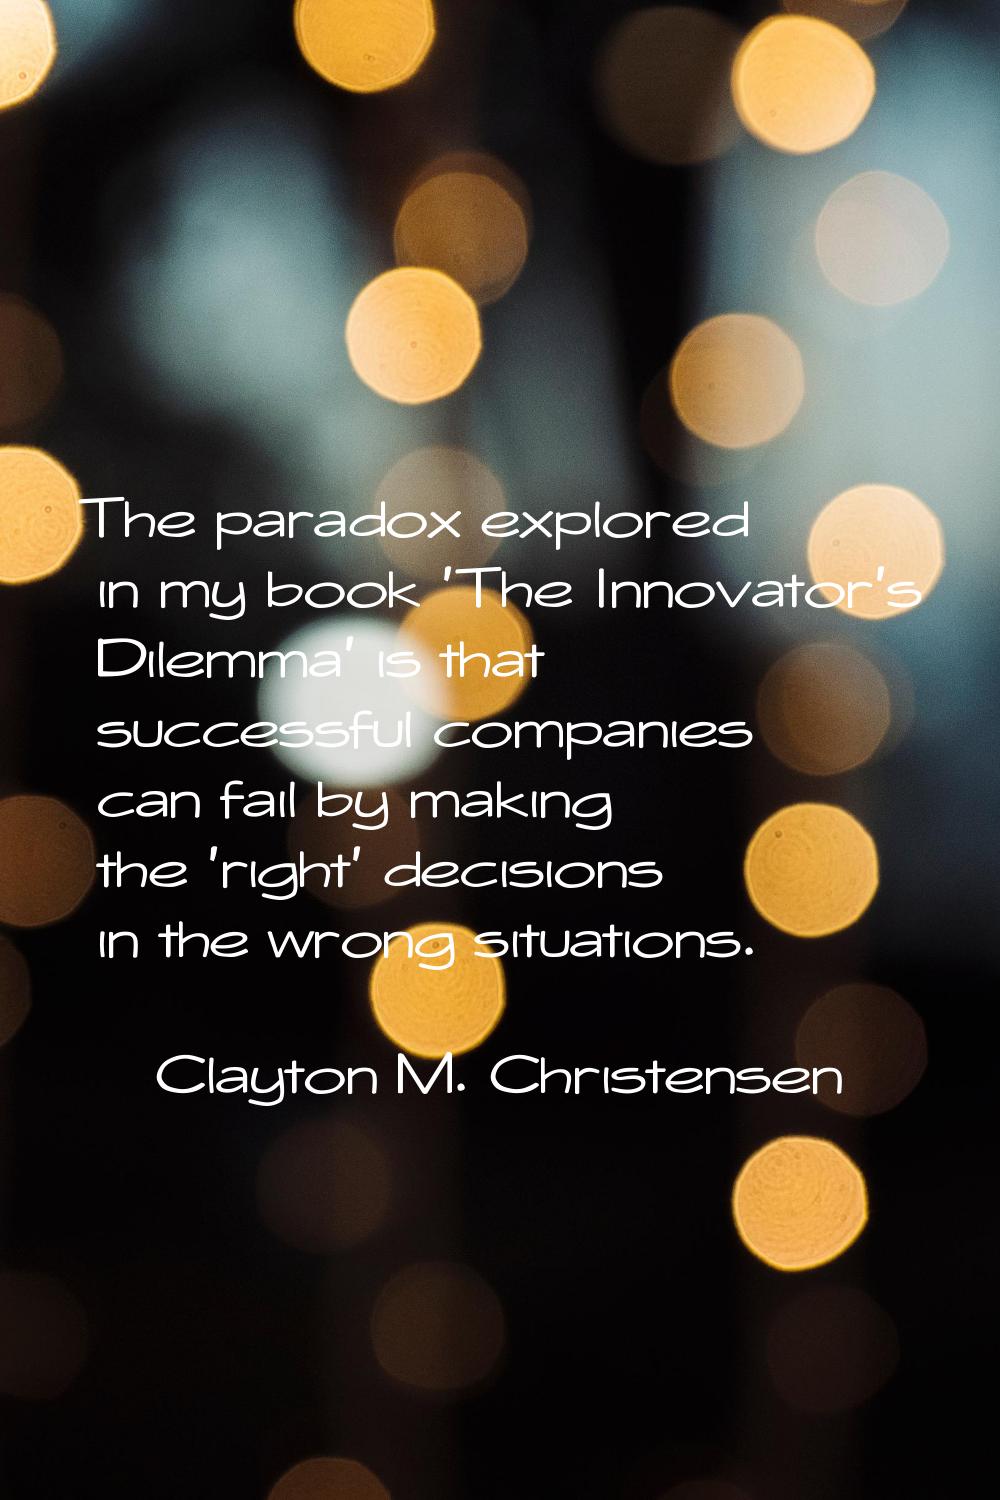 The paradox explored in my book 'The Innovator's Dilemma' is that successful companies can fail by 